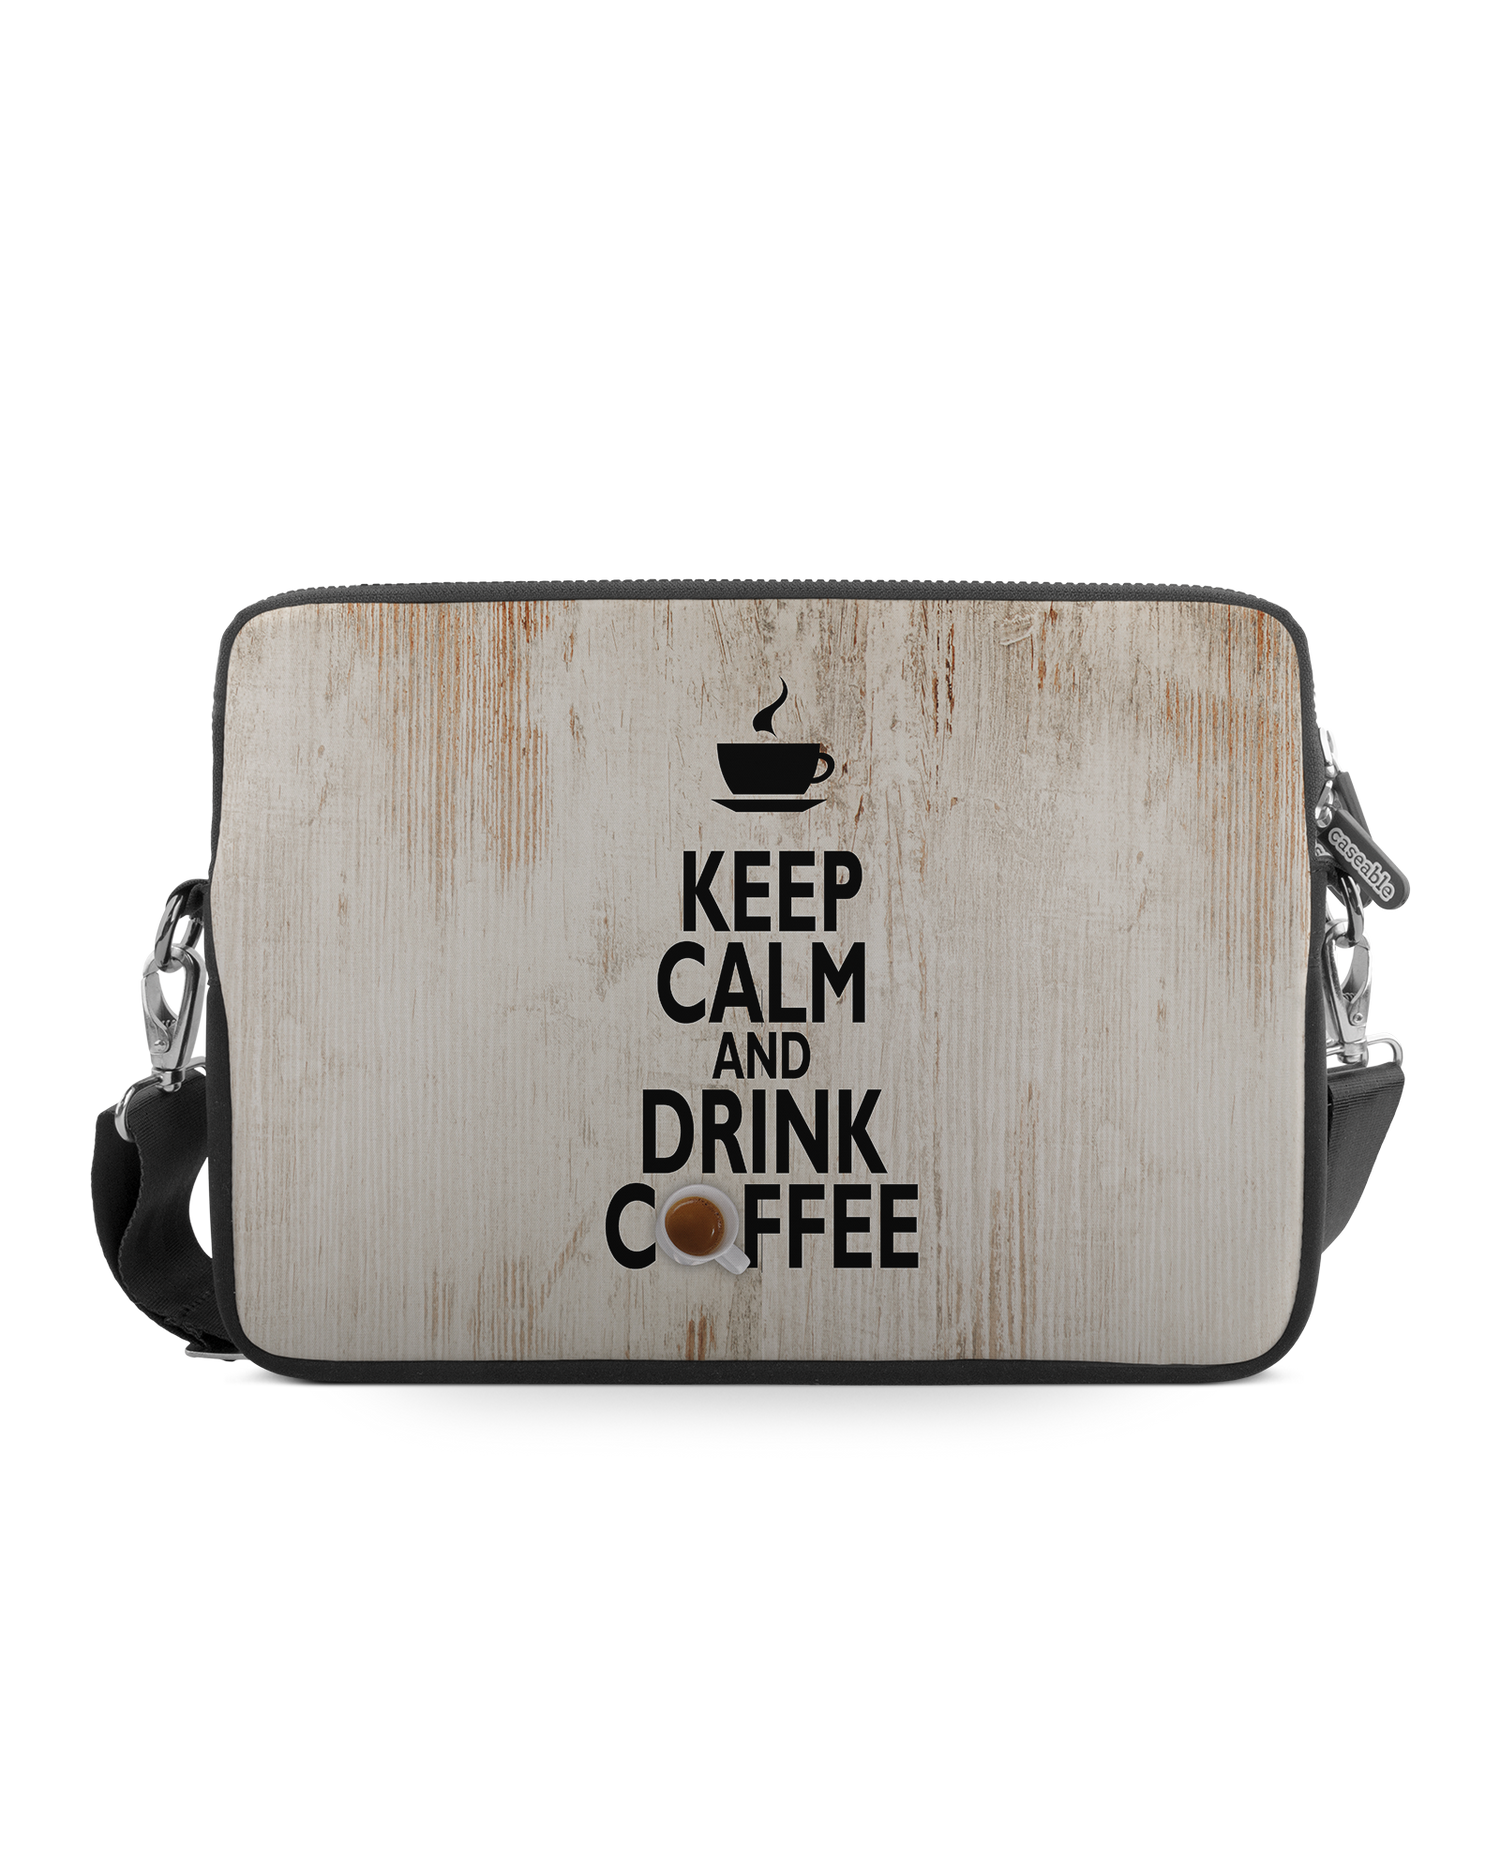 Drink Coffee Premium Laptop Bag 13-14 inch: Front View